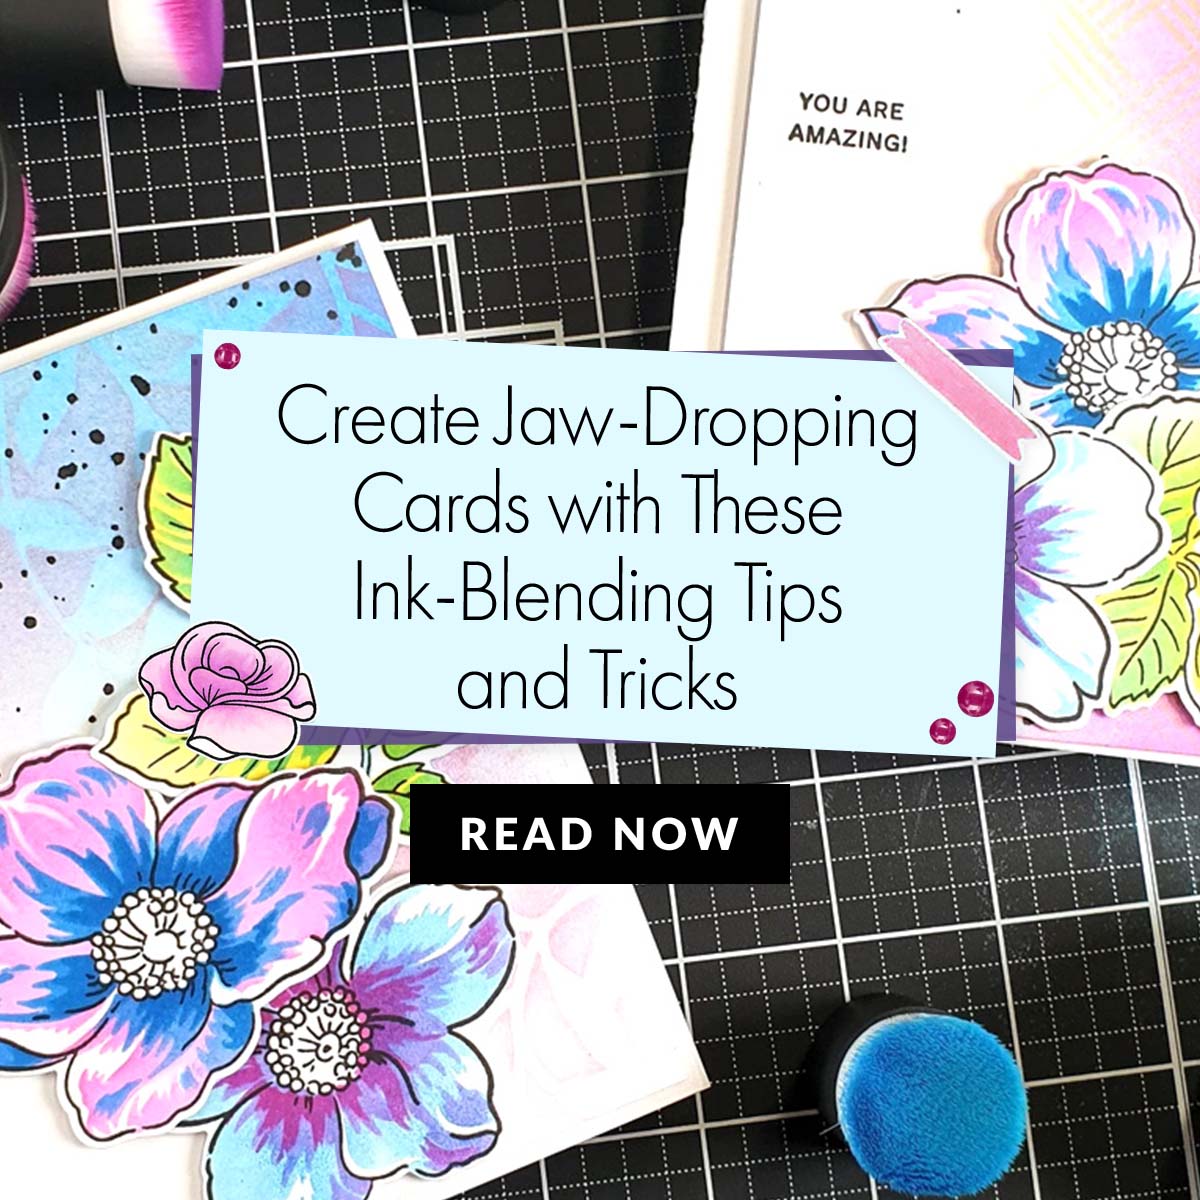 Mastering Ink Blending for Jaw-Dropping Card Designs